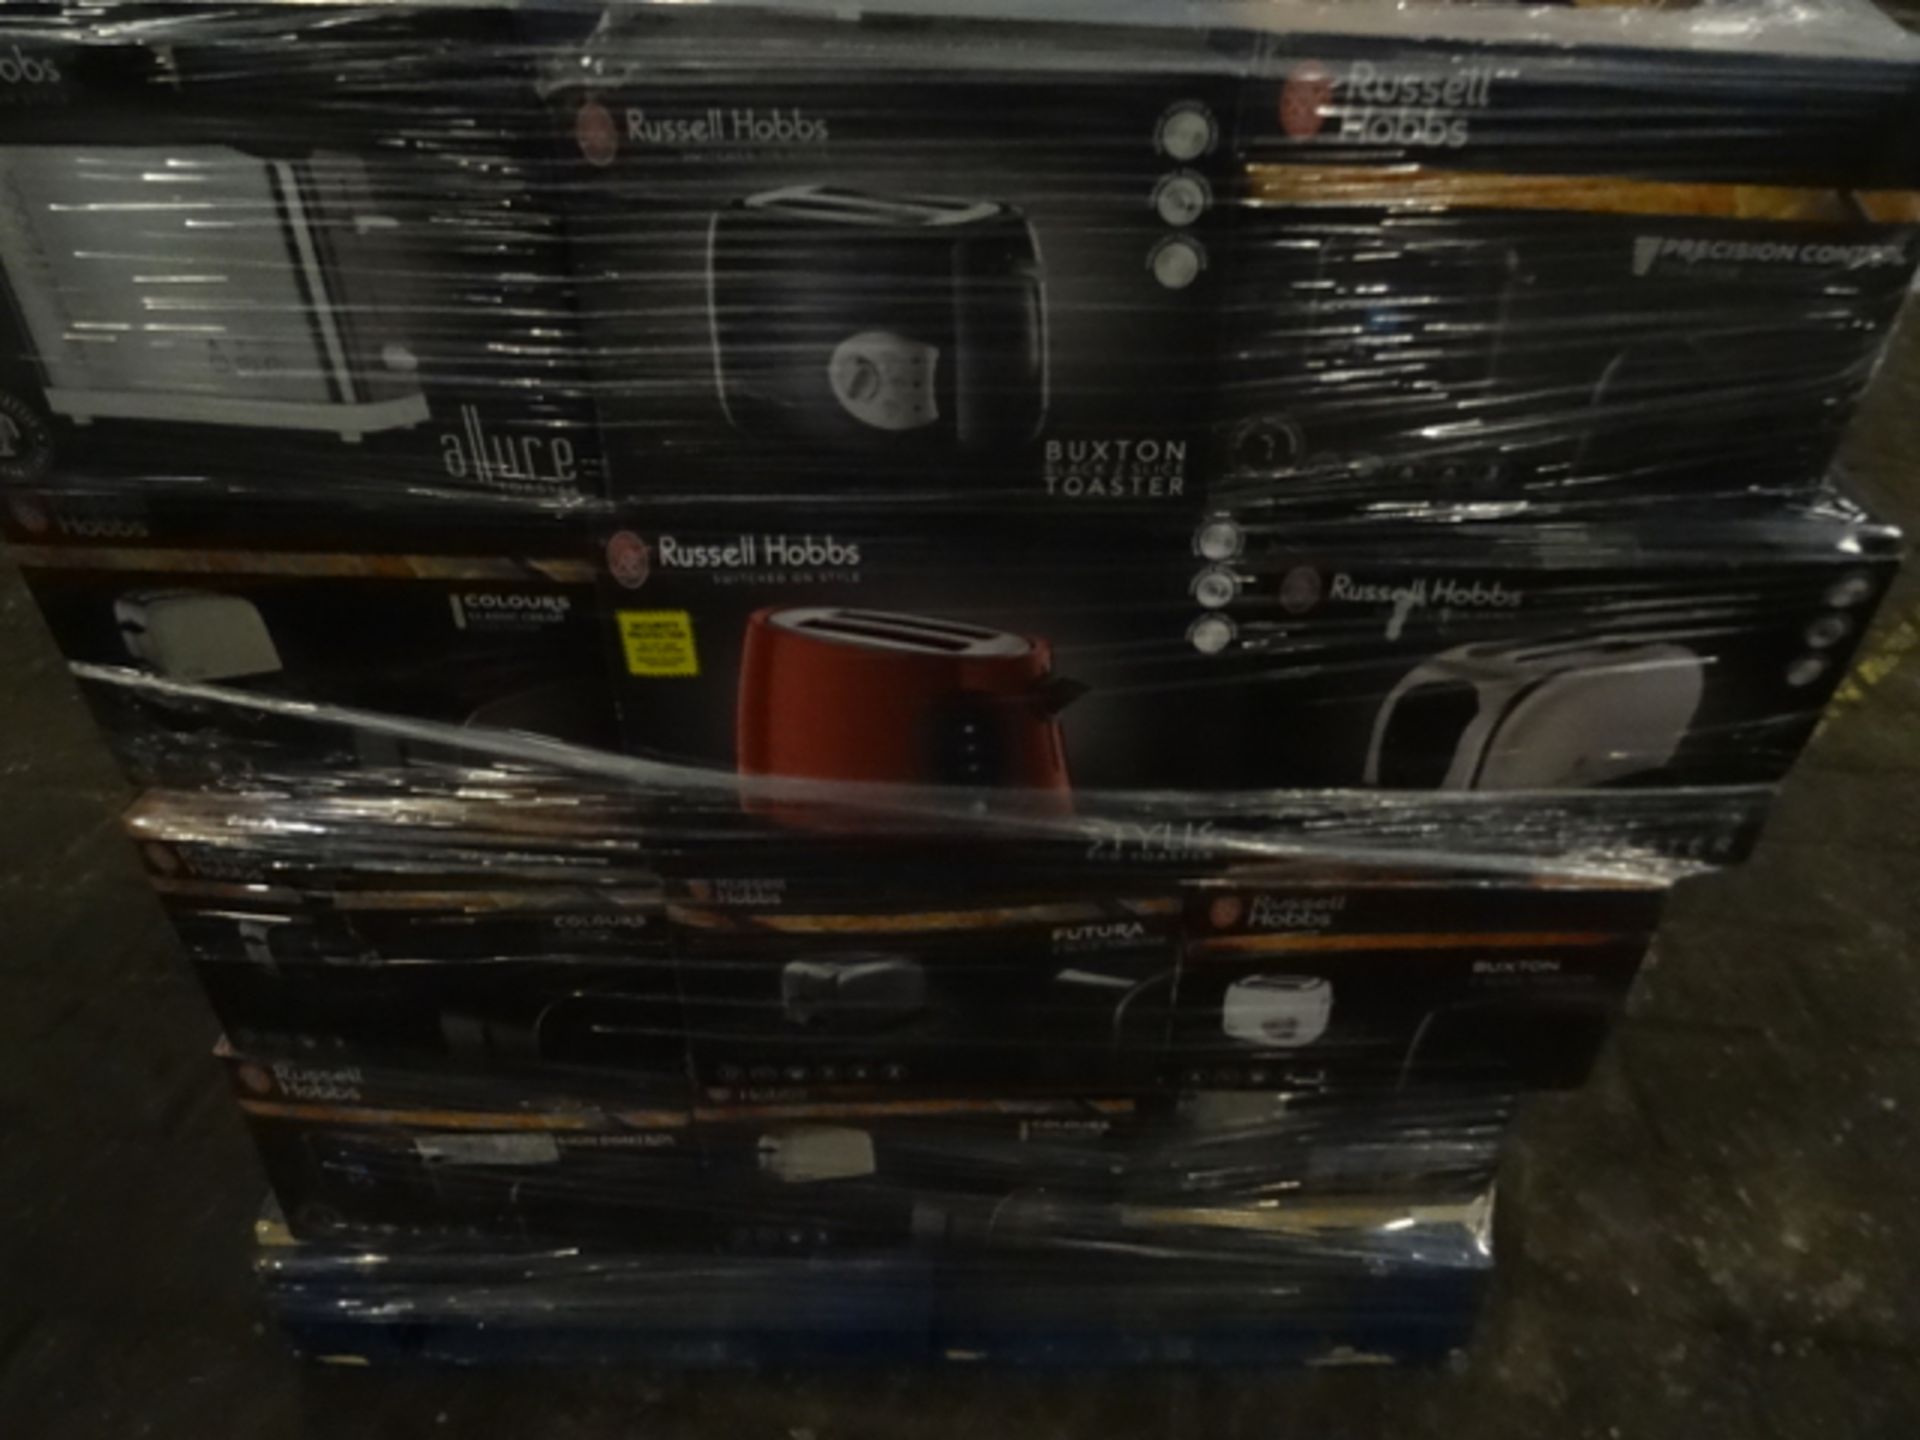 1 x High Value (RH12) Pallet to contain approx. 71 x 2 Slice Russell Hobbs Toasters to include - Image 3 of 4